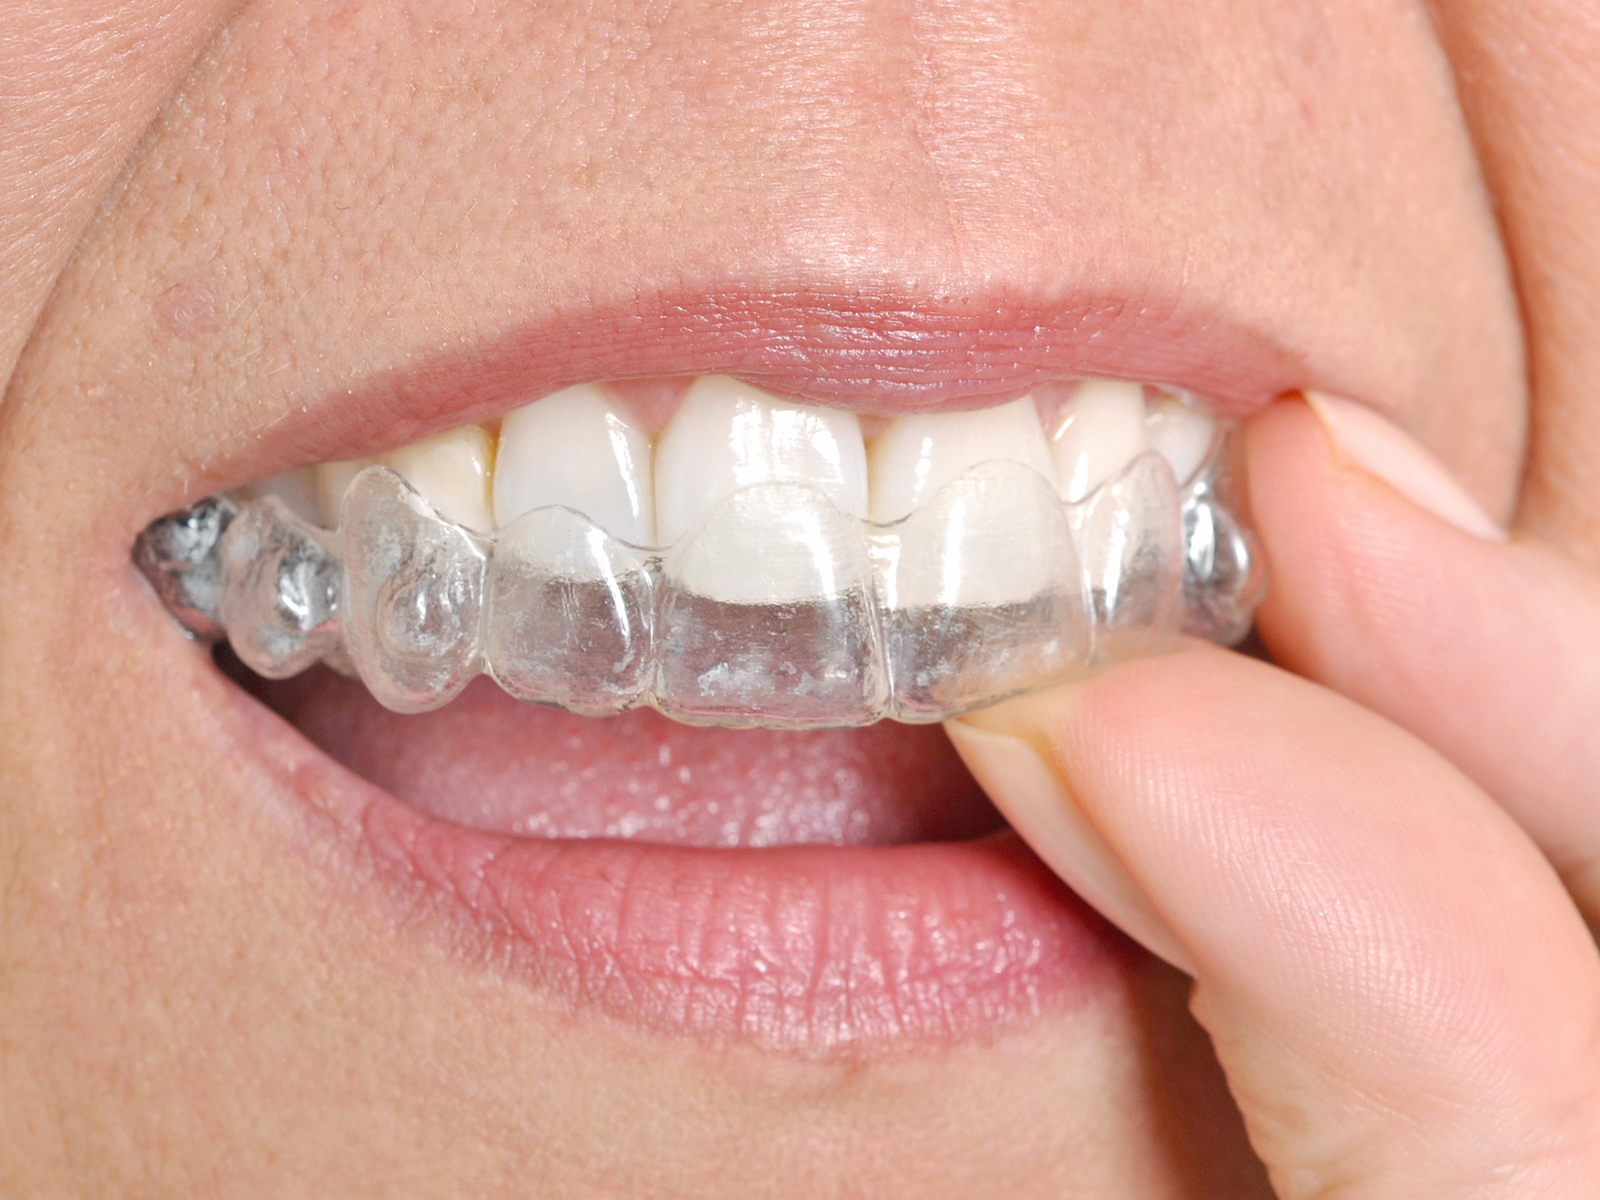 Who should not get Invisalign?